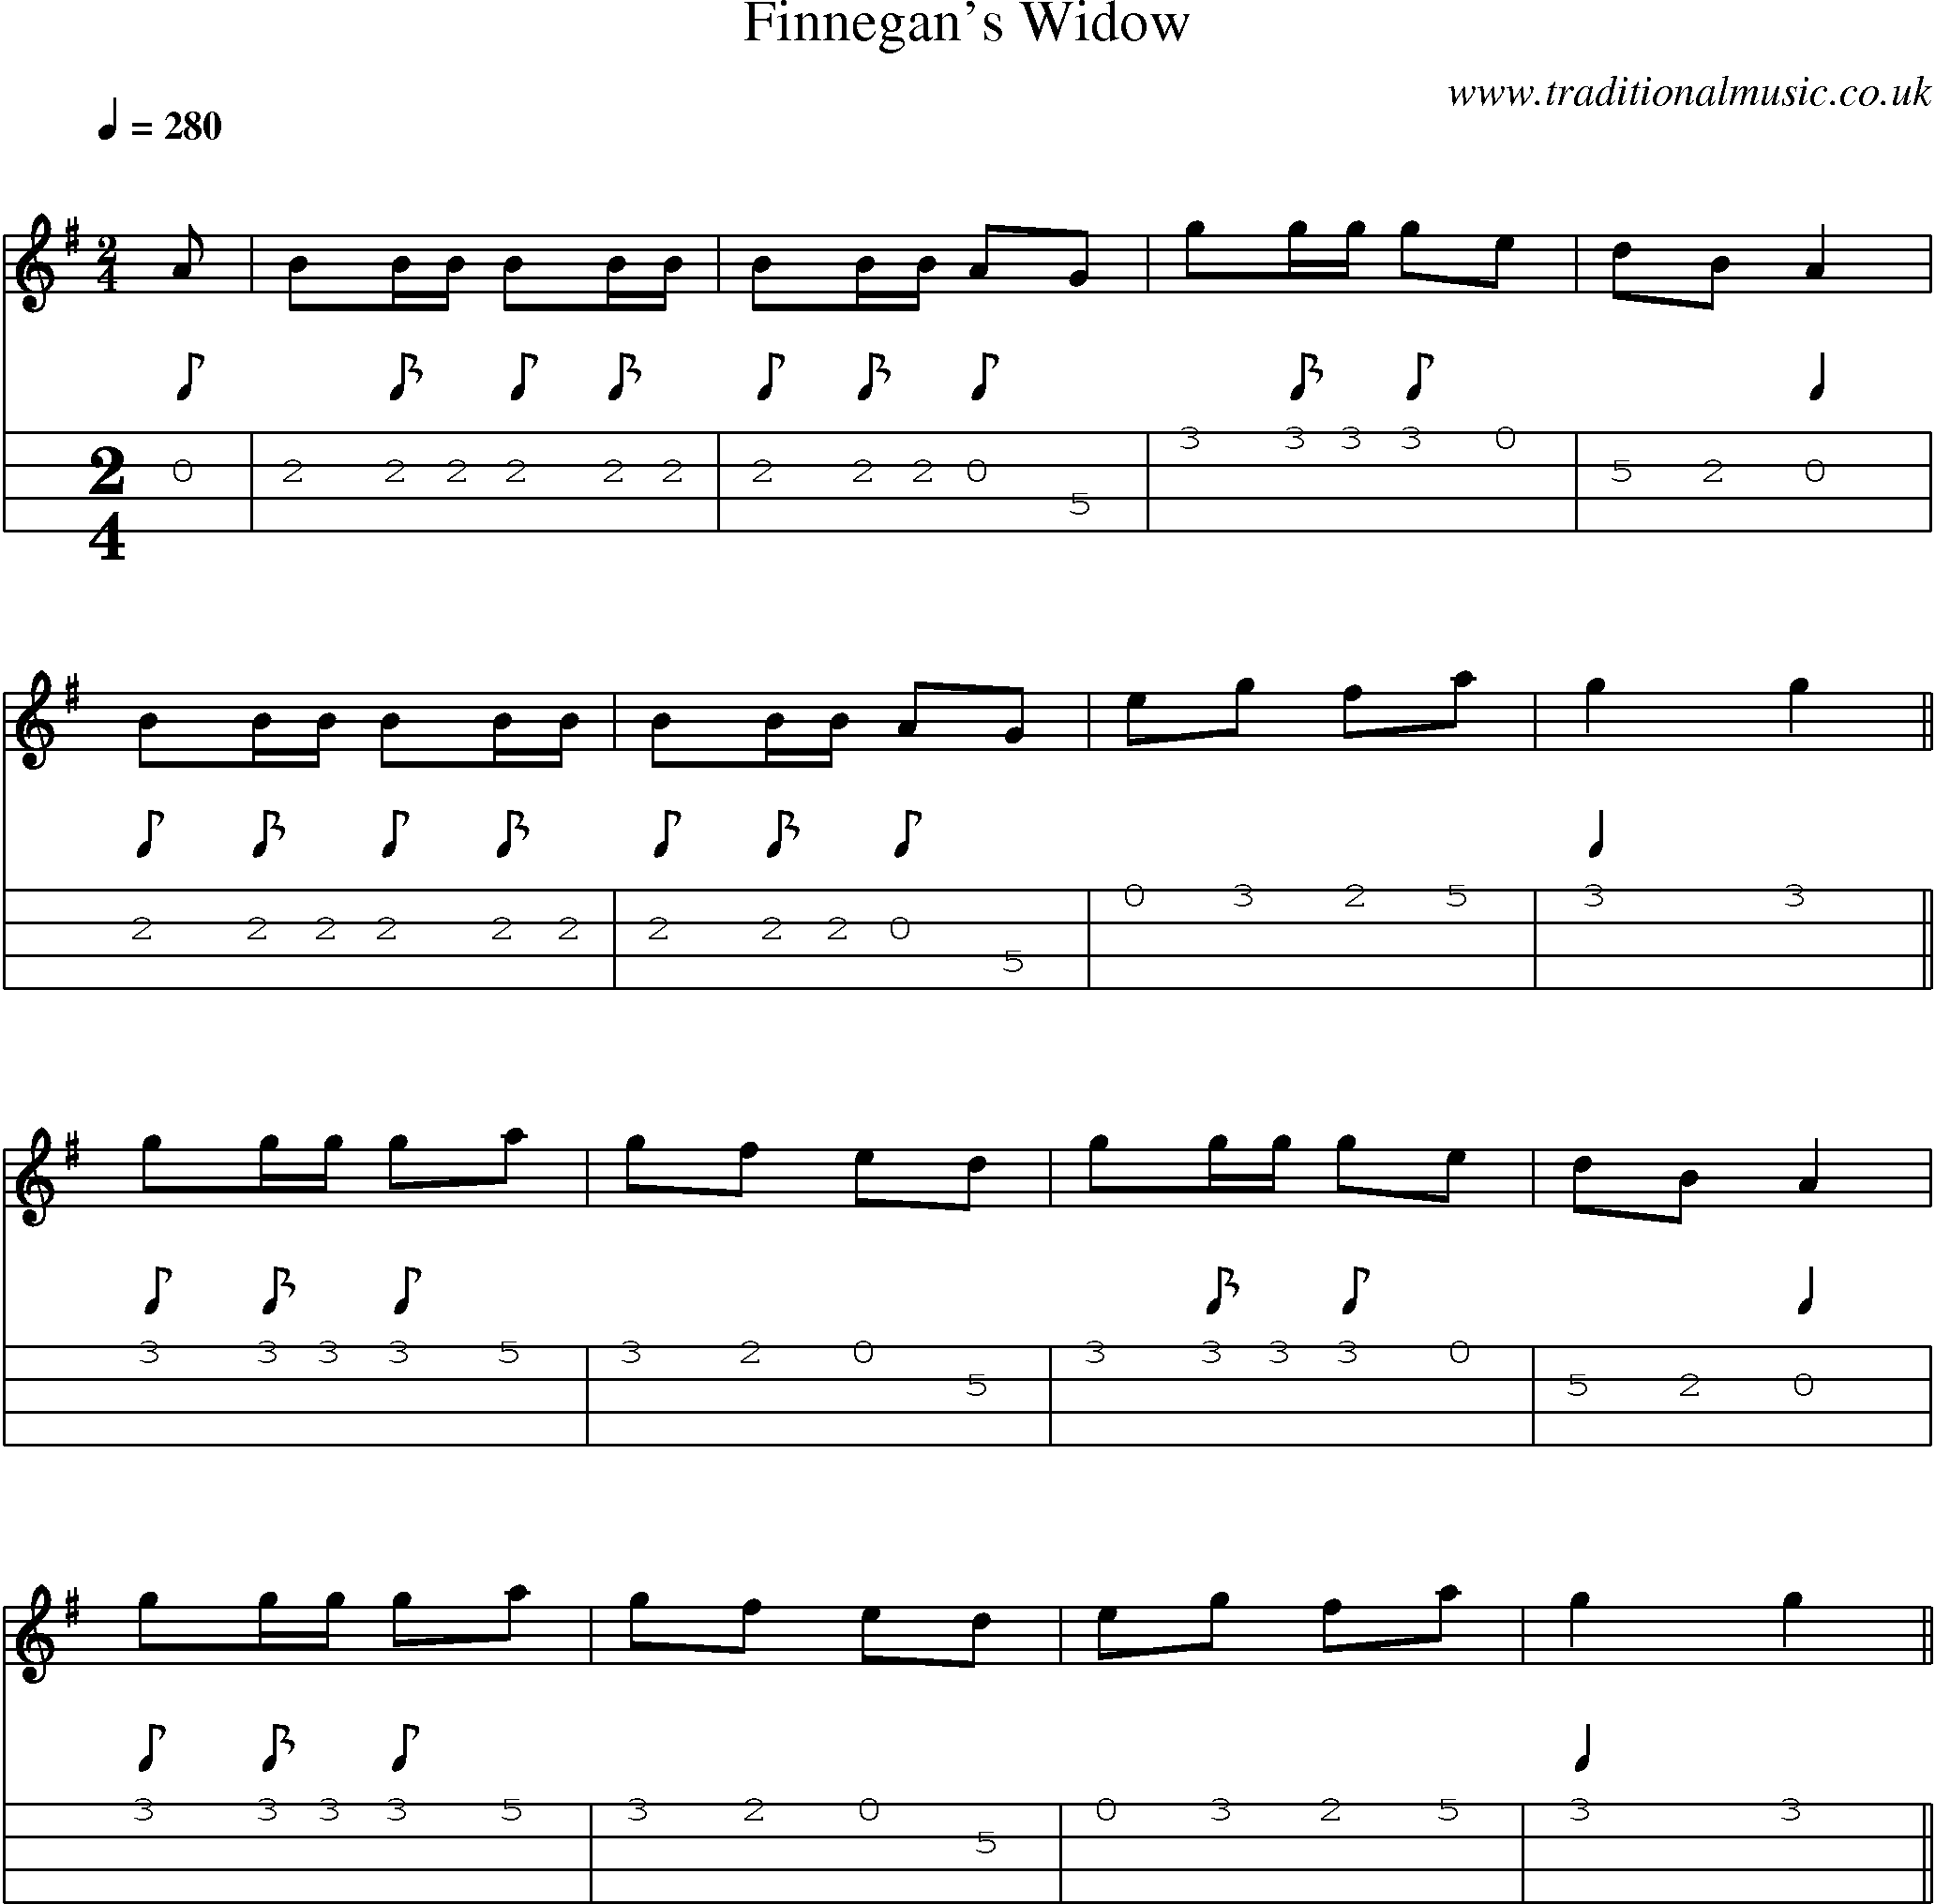 Music Score and Mandolin Tabs for Finnegans Widow